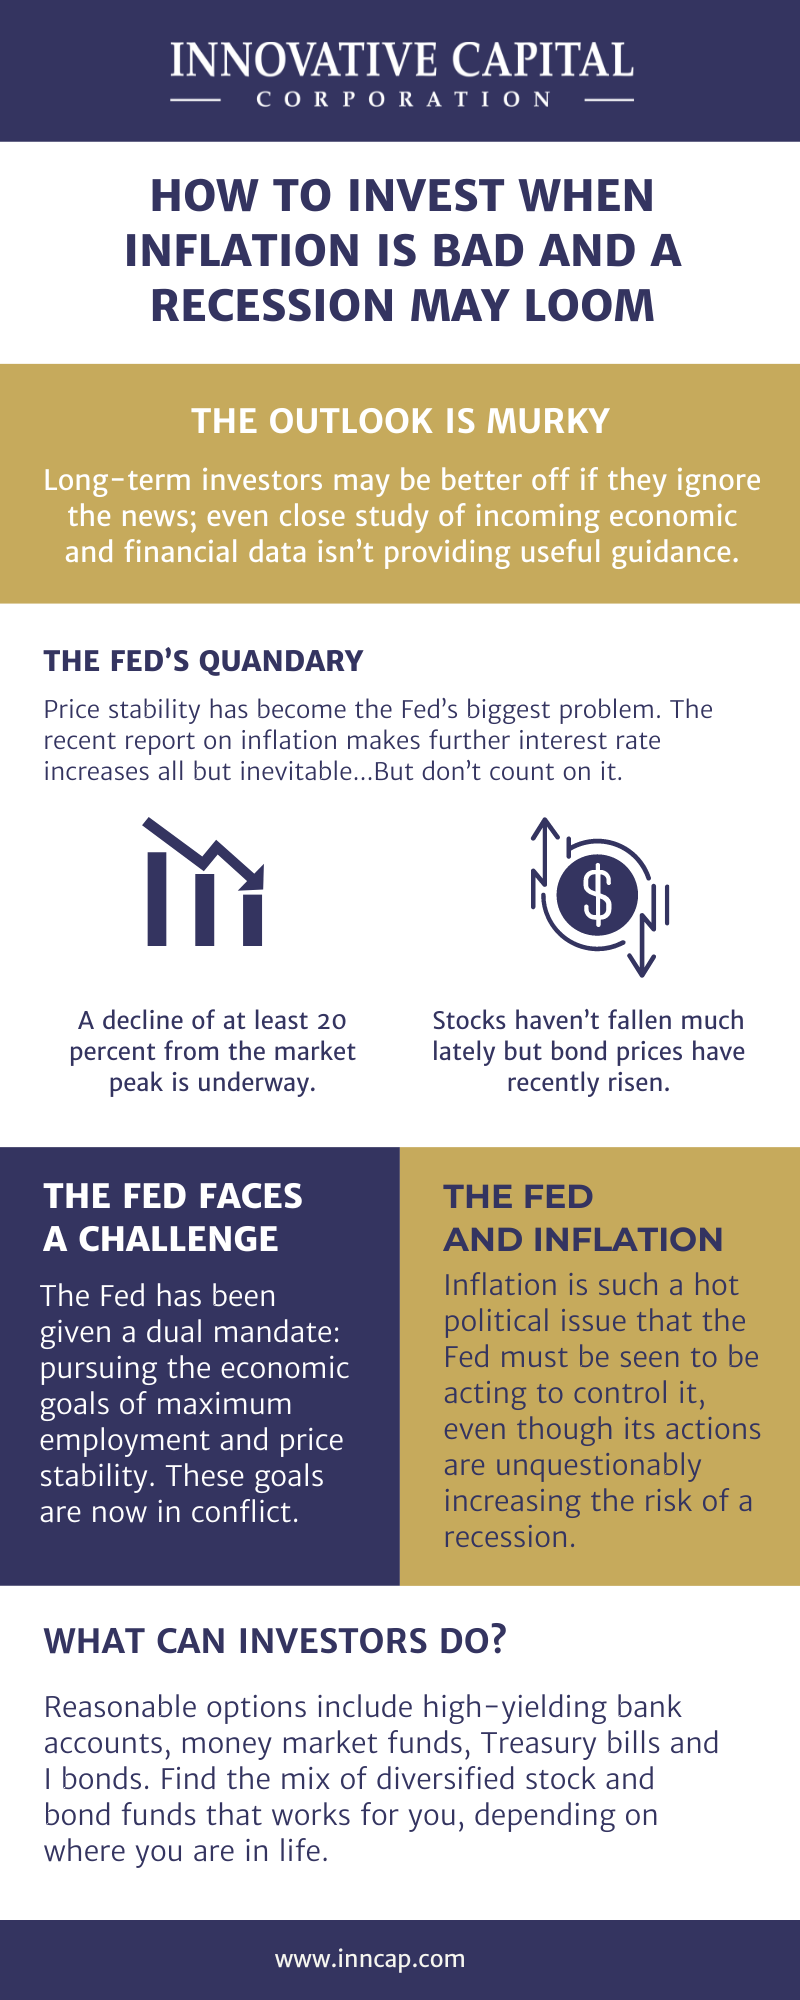 infographic about how to invest with inflation and recession